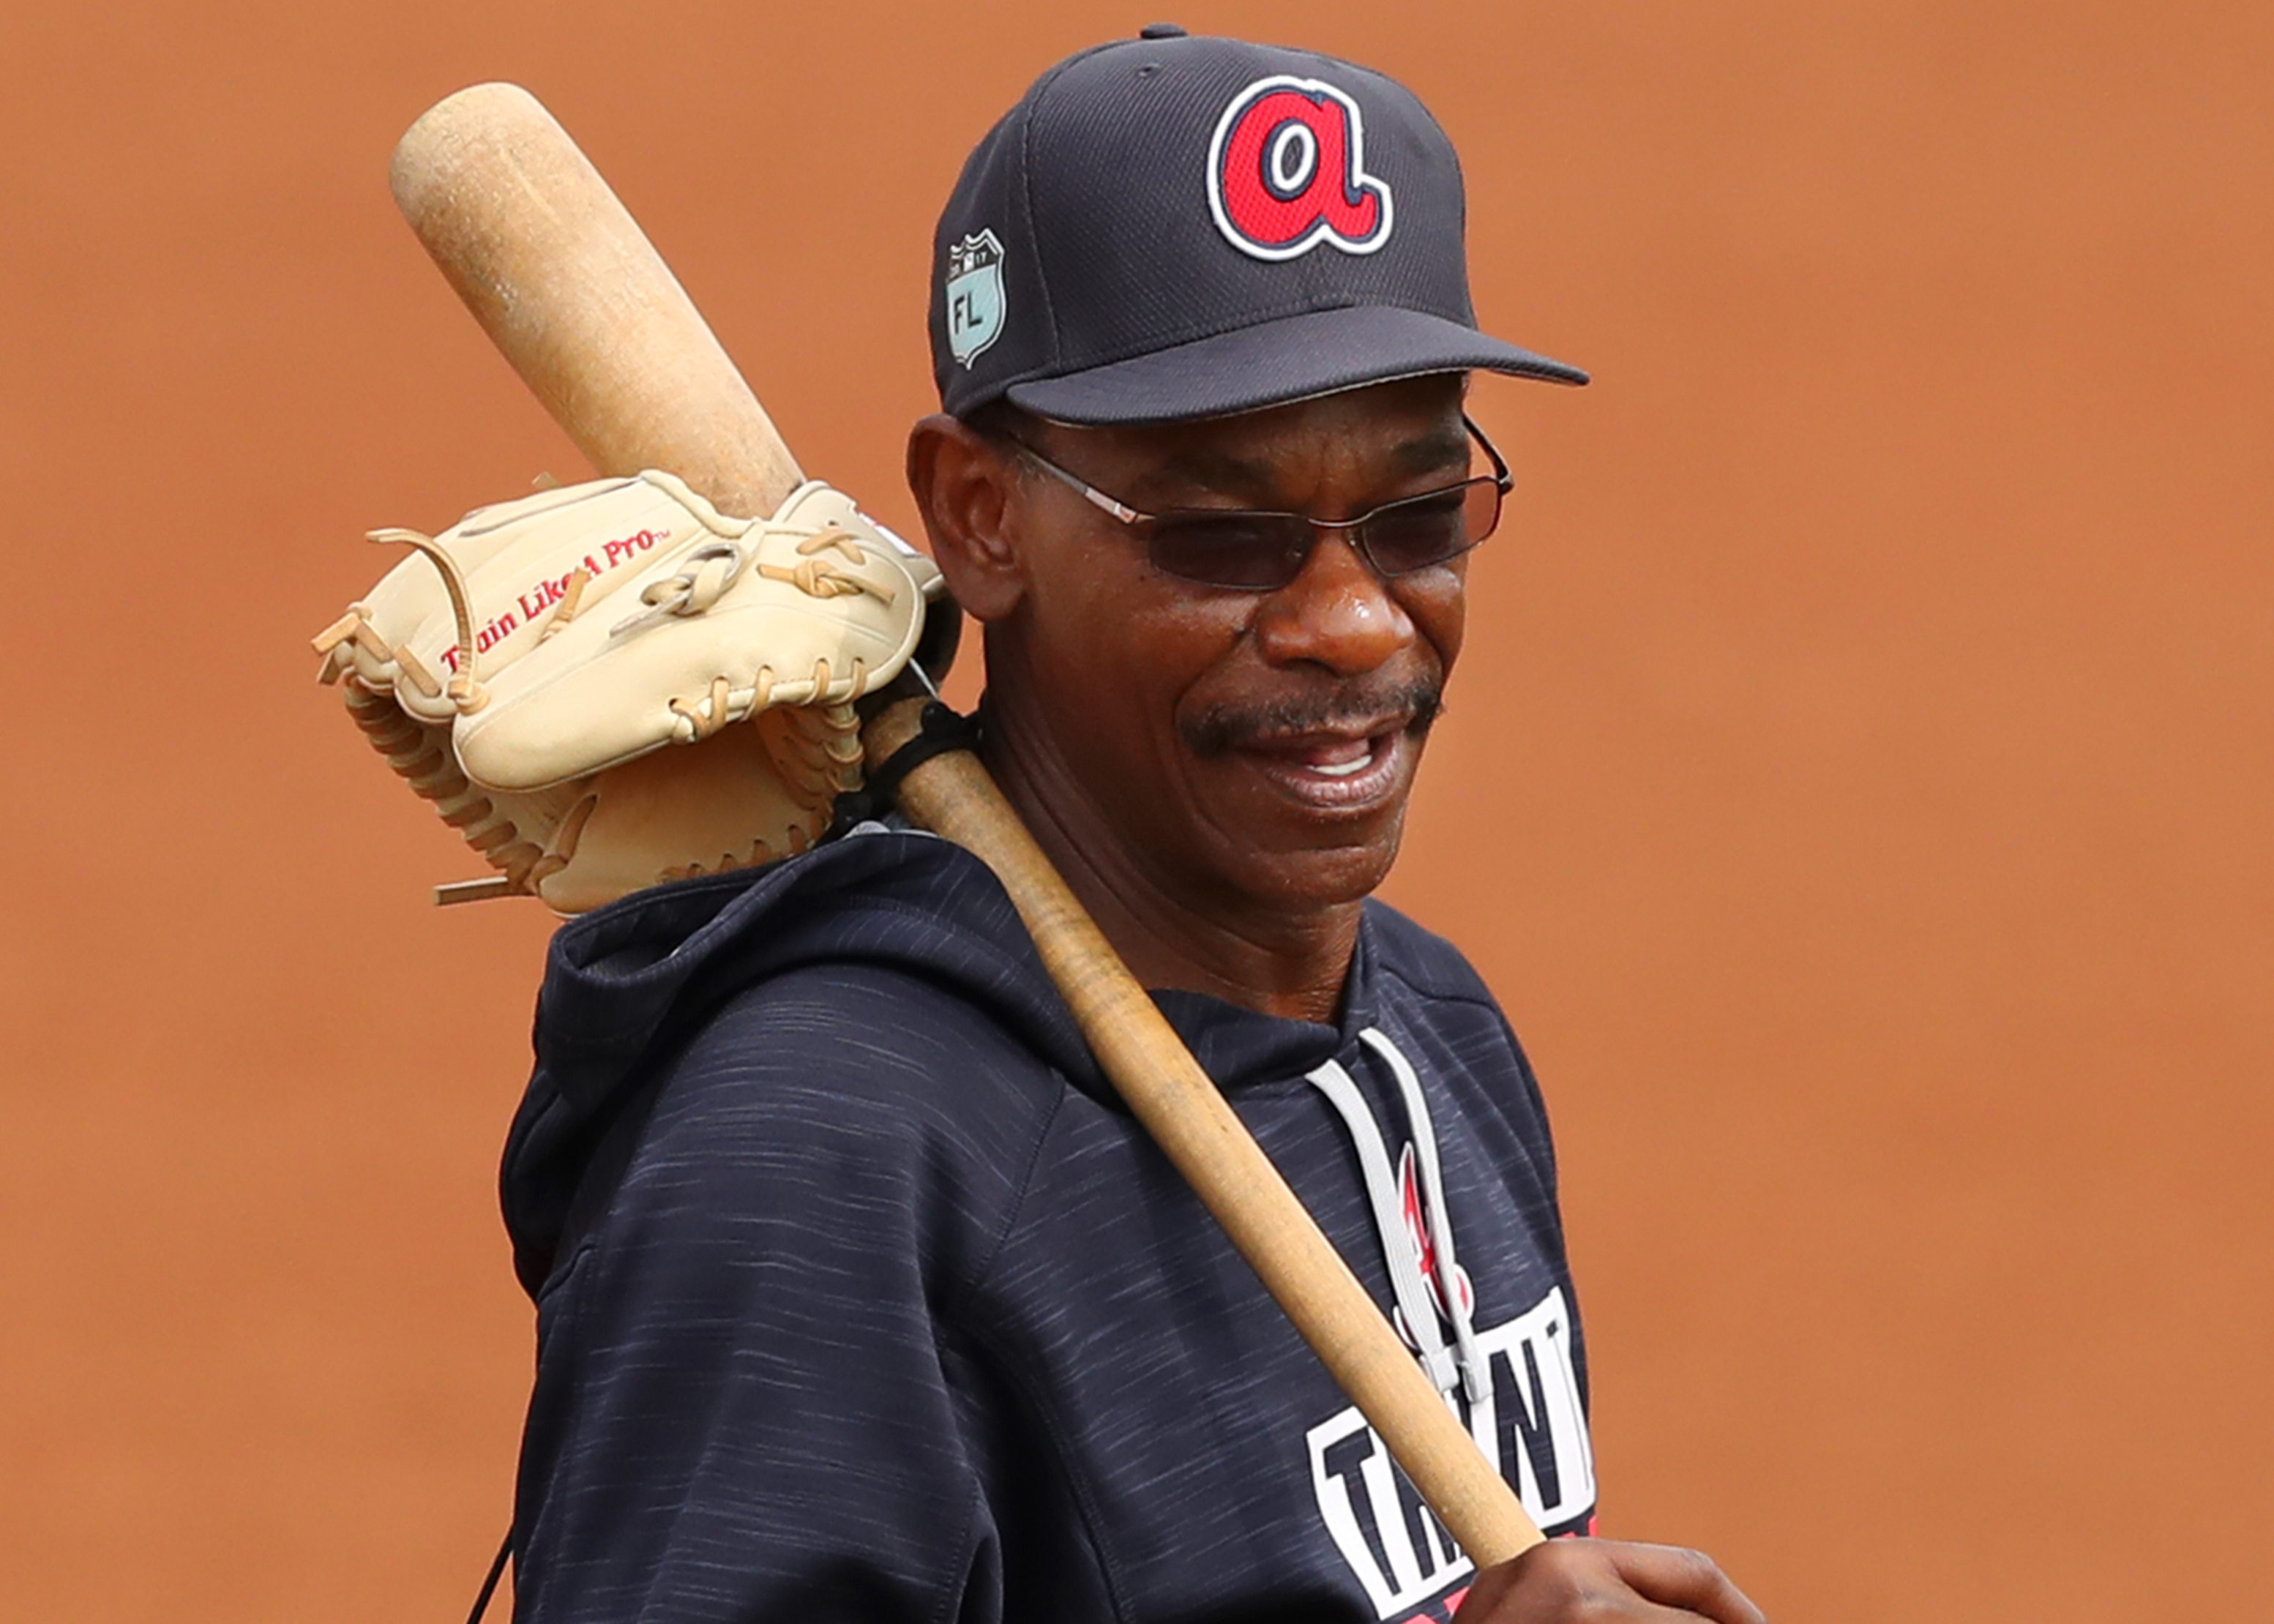 Braves' Ron Washington making most of chance after life nearly derailed